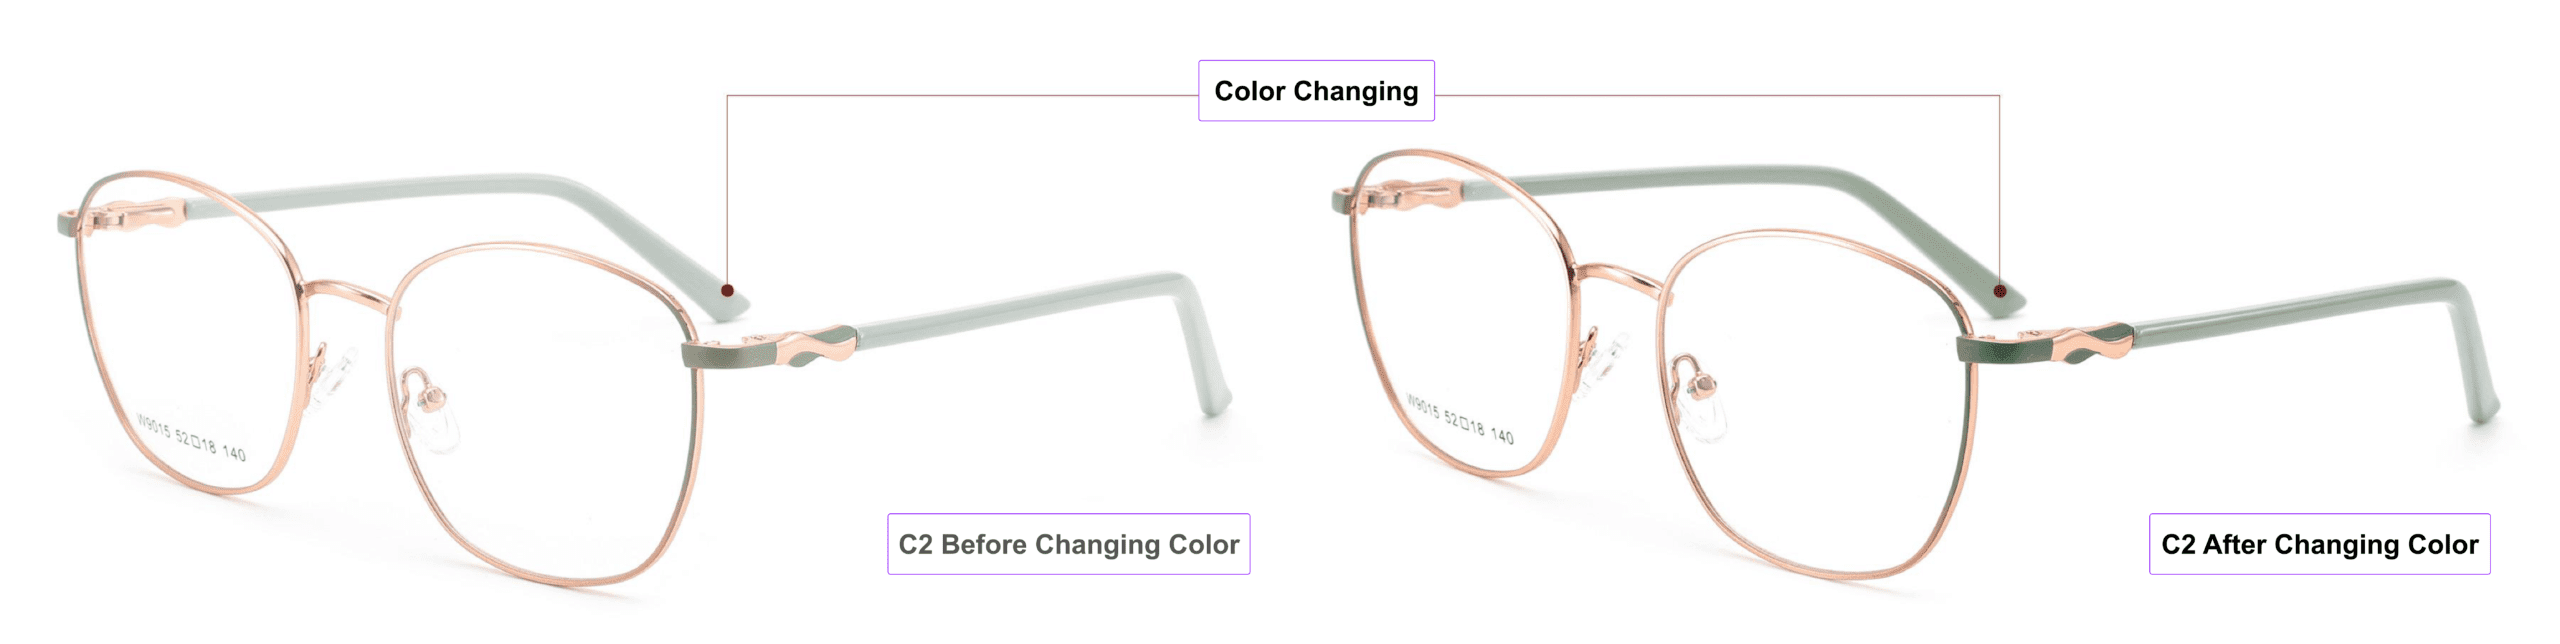 Sunlight Activated, Color Changing Glasses Frames, China Wenzhou supplier, mist blue, grass green, gold, eyeglass accessories